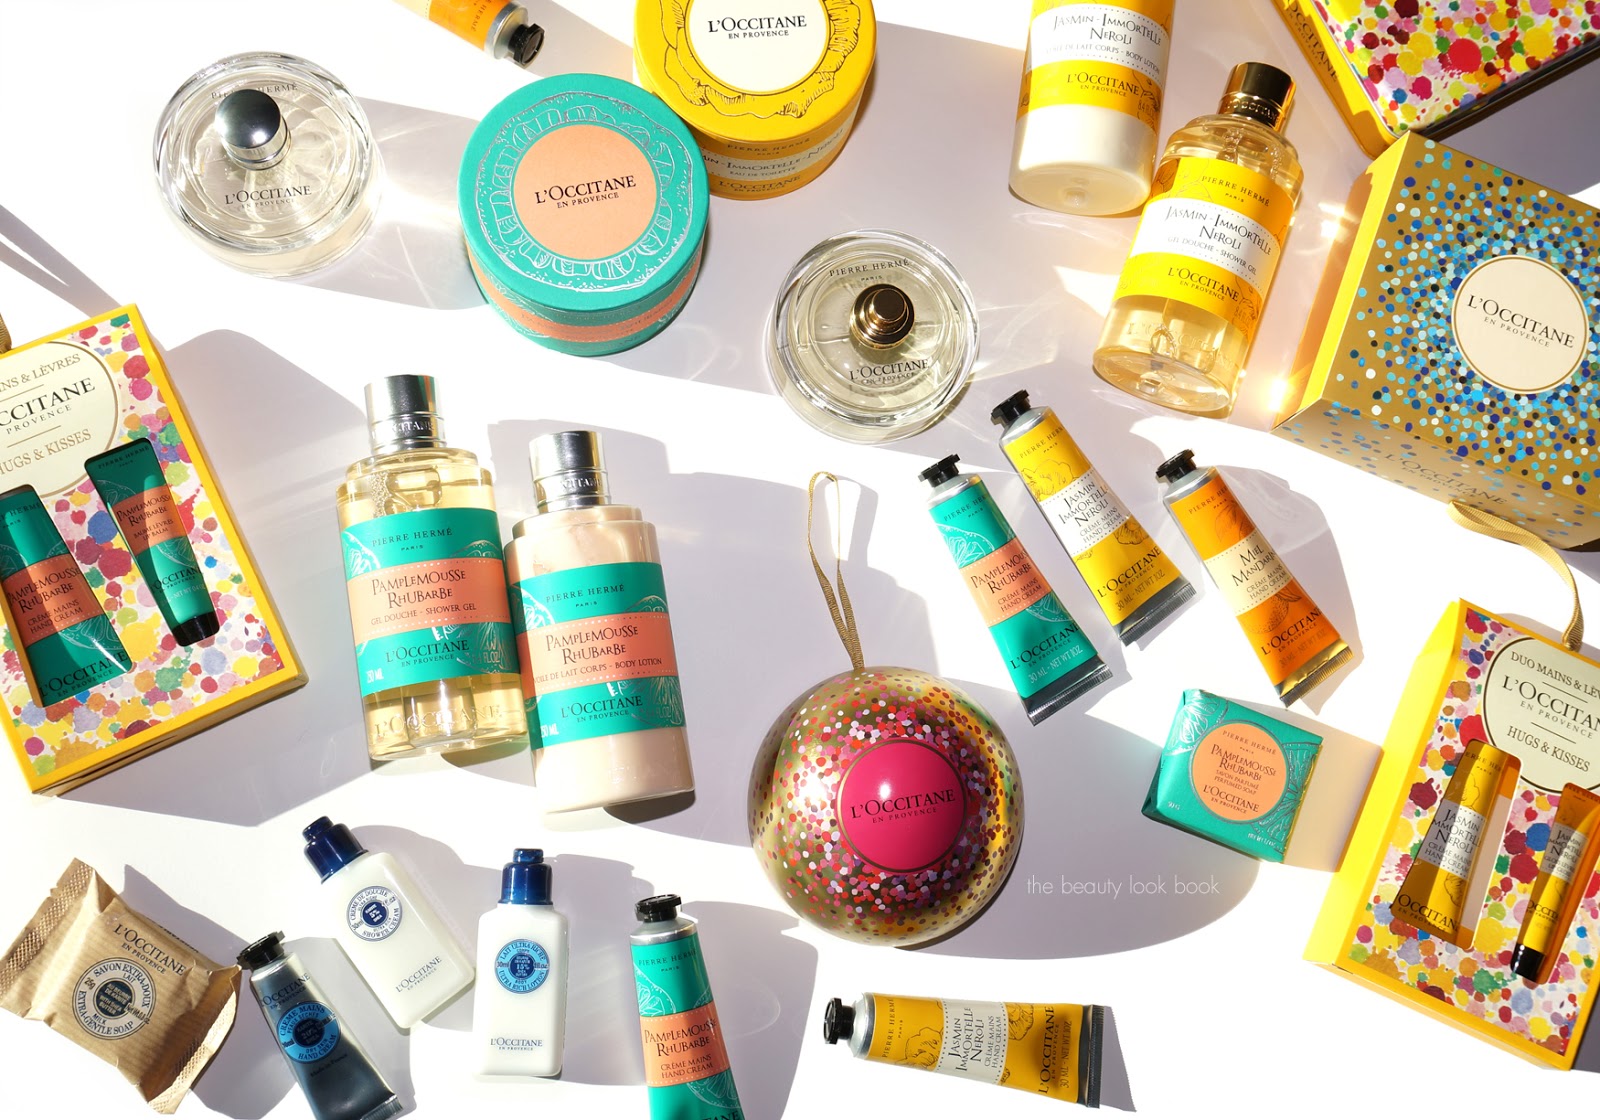 L'Occitane x Pierre Hermé Jasmin-Immortelle Neroli and Pamplemousse  Rhubarbe for Holiday 2015 - The Beauty Look Book